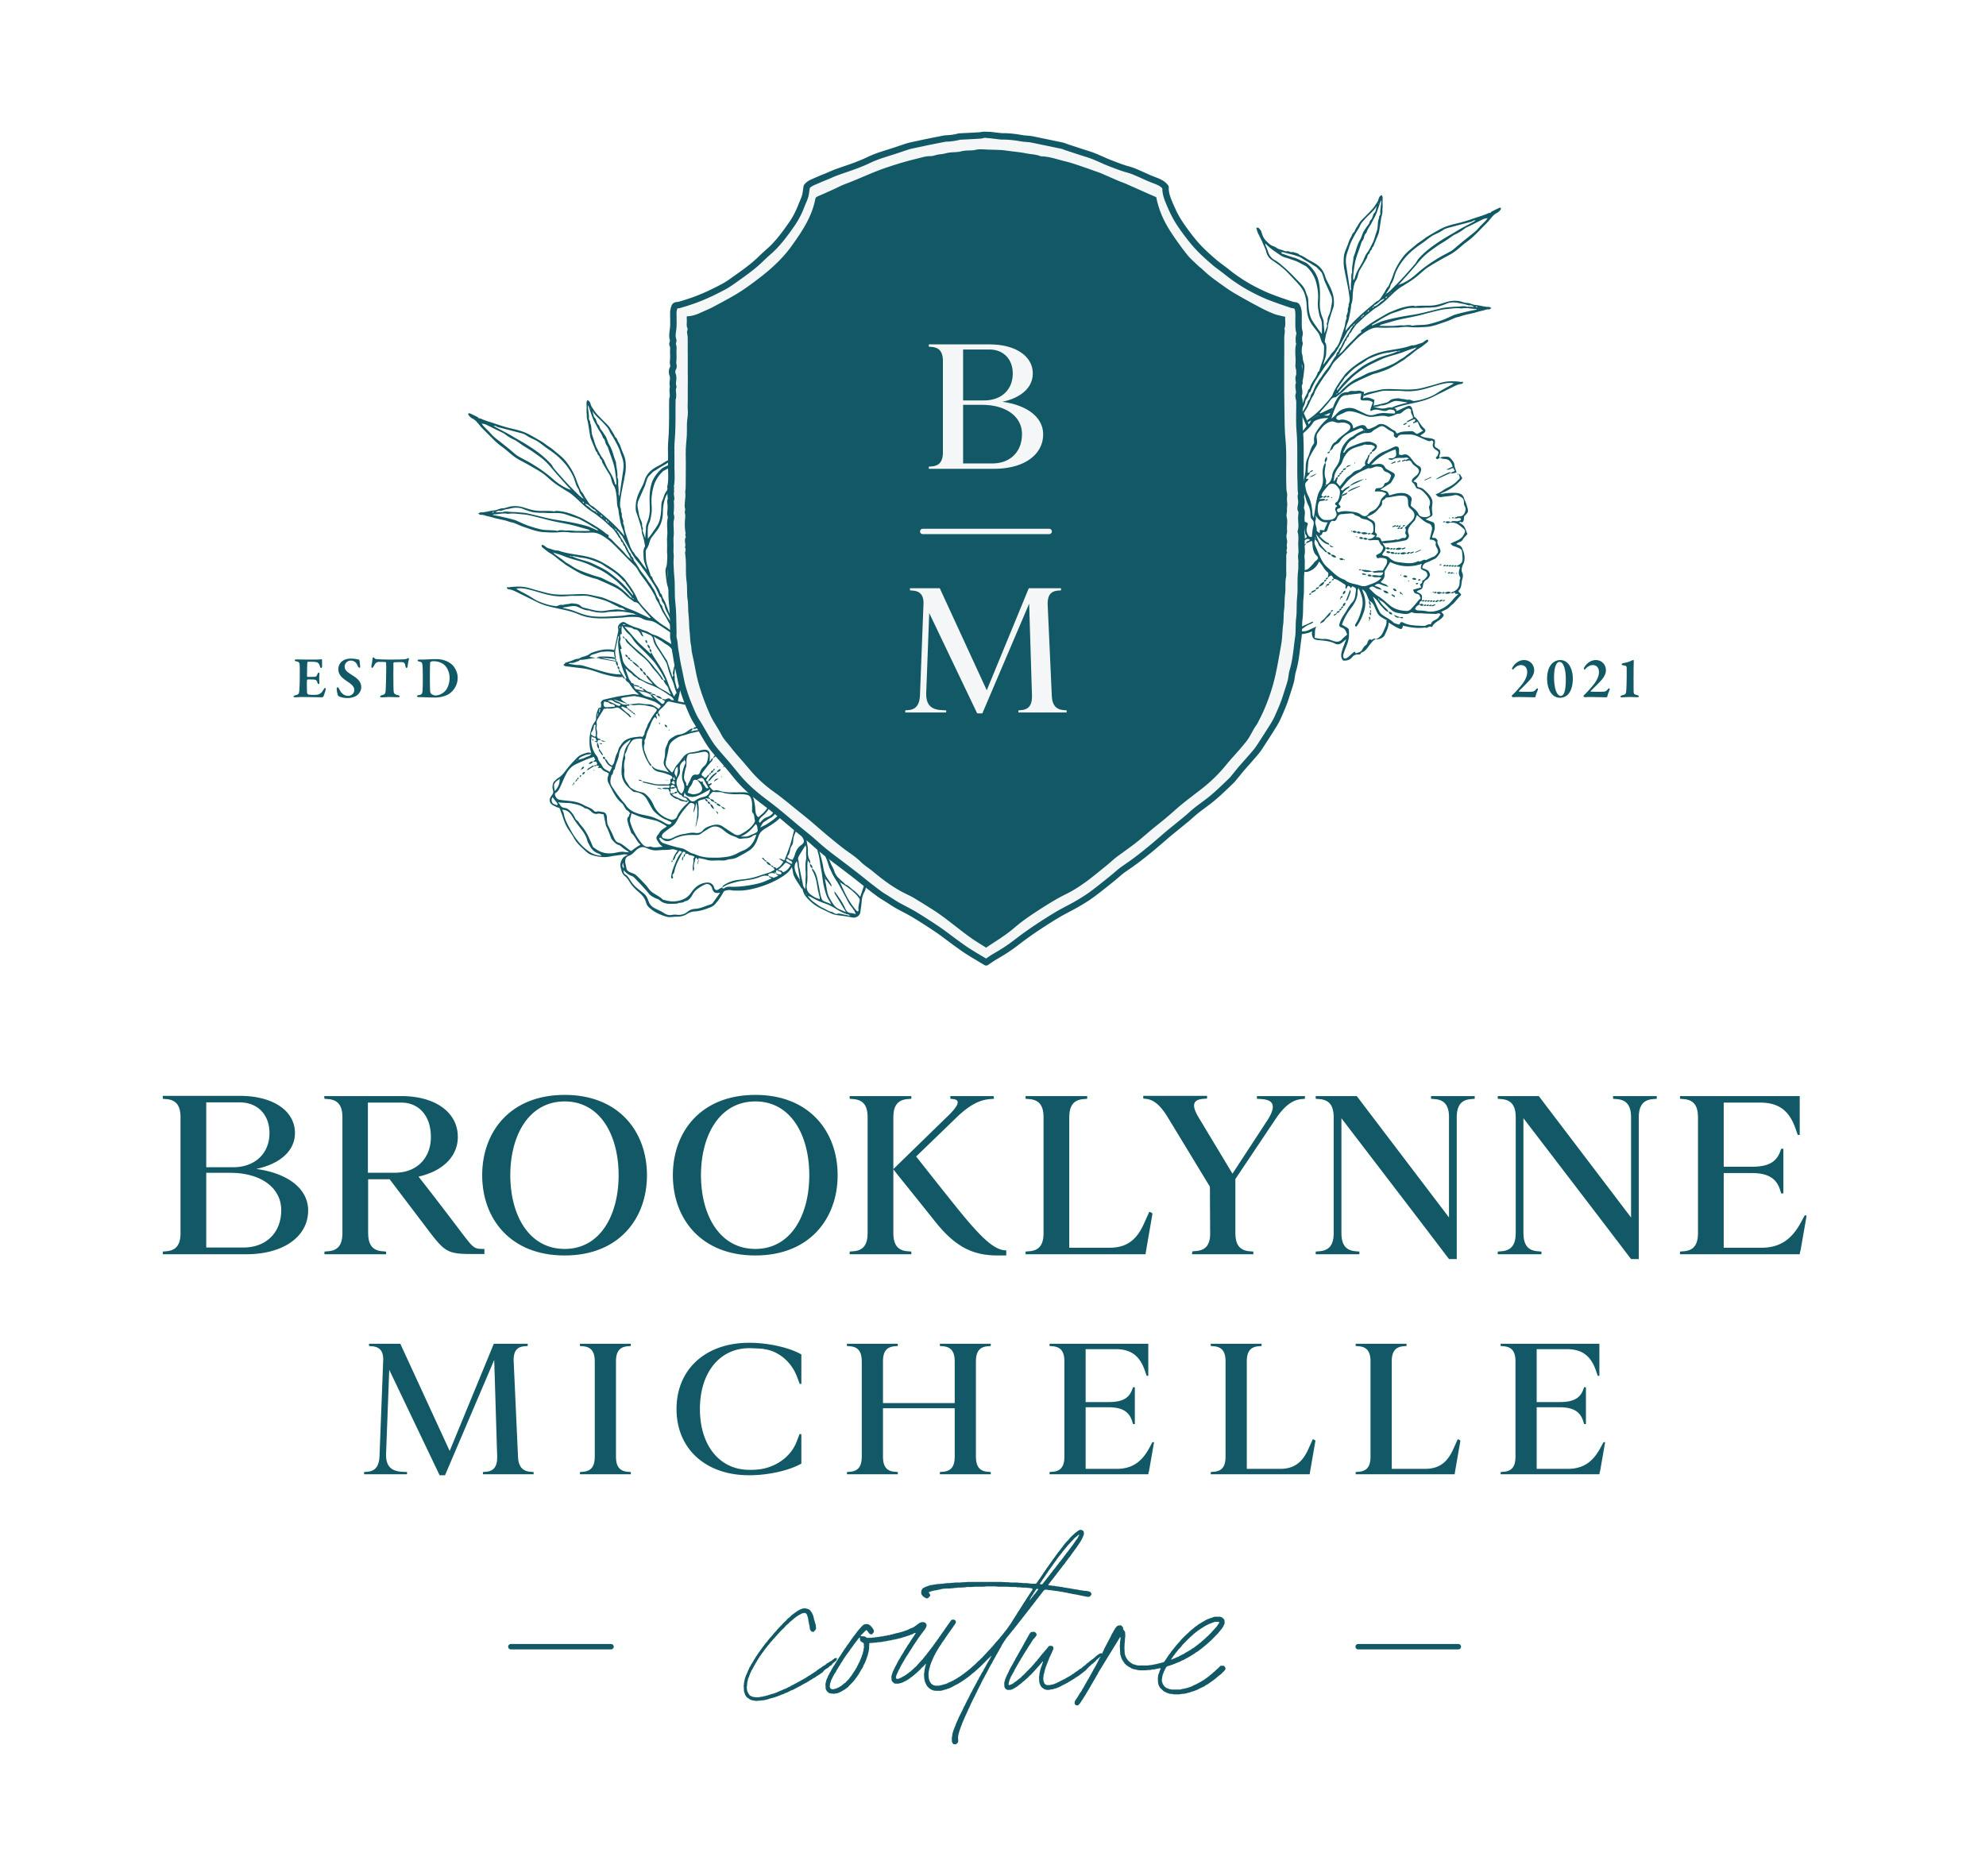 Teal sheild logo exclaiming Brooklynne Michelle Couture